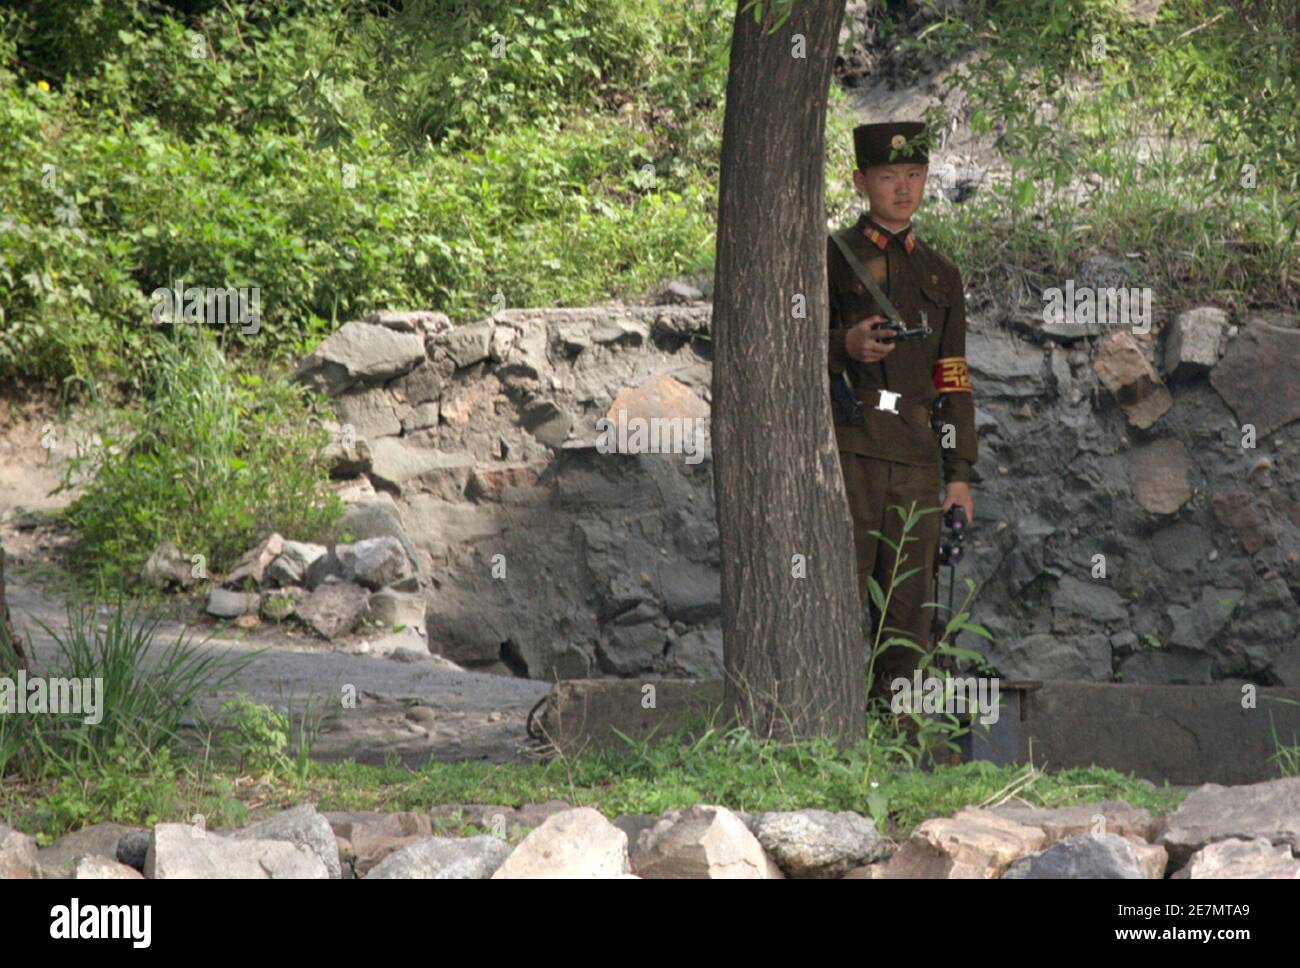 A North Korean soldier guards the bank of the Yalu River near the North Korean town of Sinuiju June 4, 2009.  North Korea put on trial on Thursday two U.S. journalists it says illegally entered the country with 'hostile intent' in a contentious case that comes as Pyongyang faces international anger for last week's nuclear test.  REUTERS/Jacky Chen (NORTH KOREA MILITARY POLITICS) Stock Photo